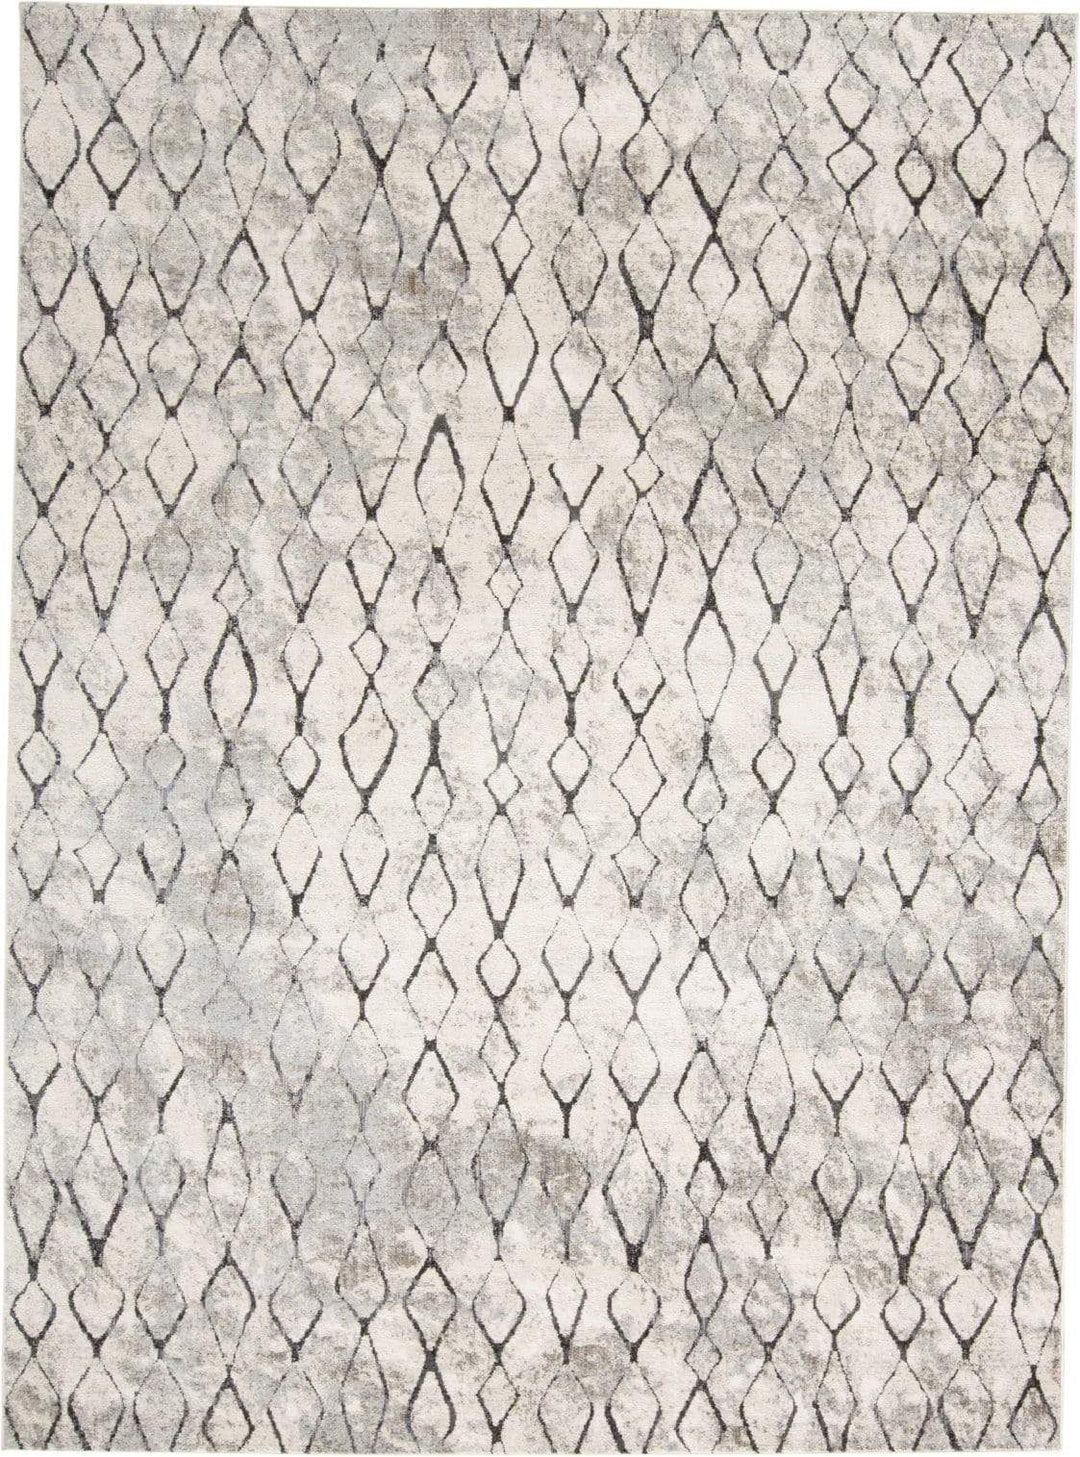 Feizy Feizy Kano Contemporary Distressed Rug - Beige & Charcoal - Available in 8 Sizes 2'-2" x 3' 8643872FSNDCHLA08